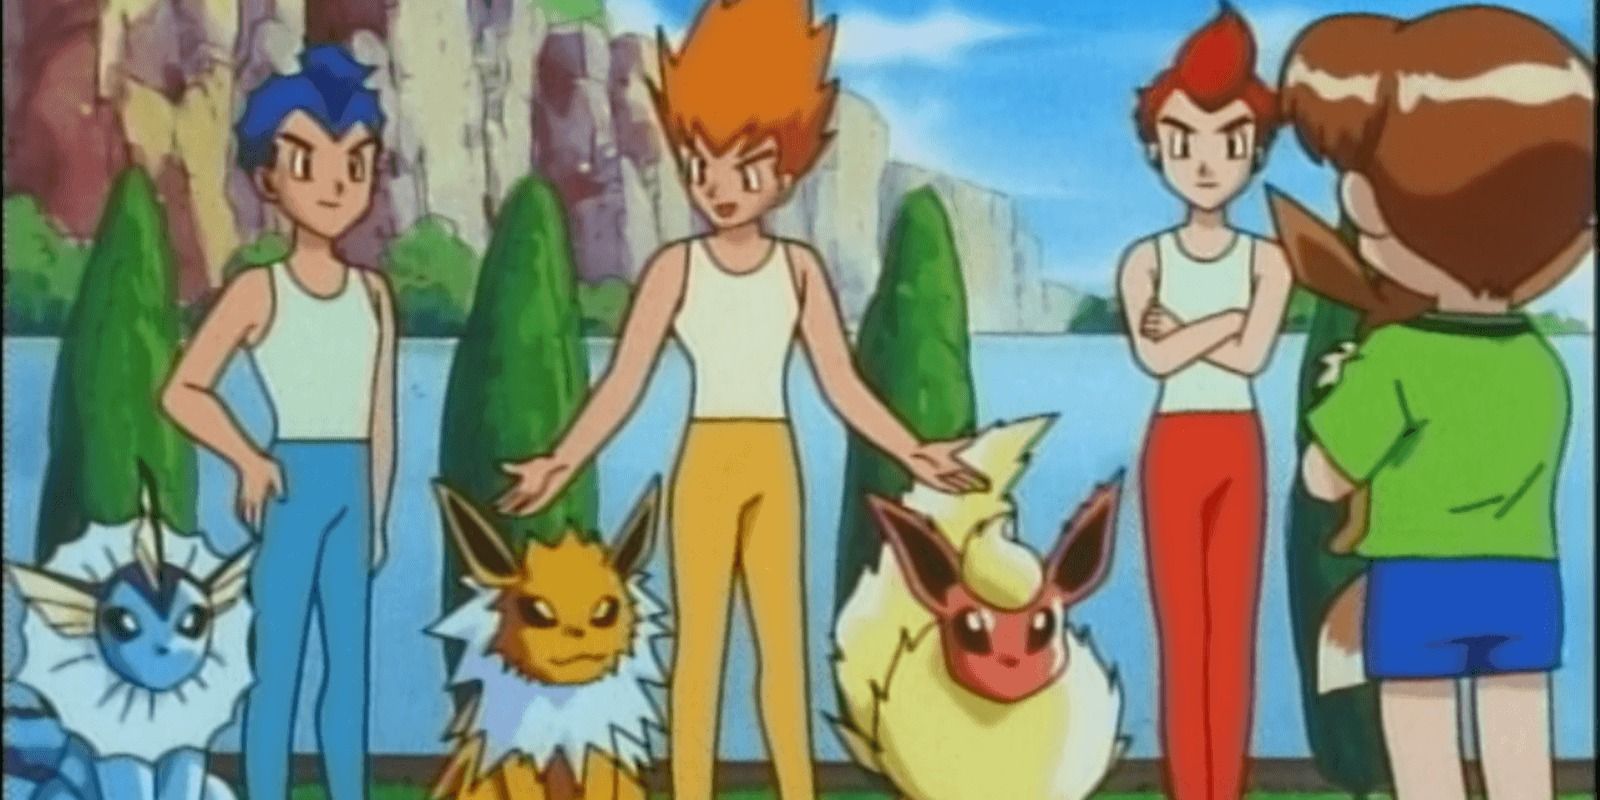 The Eevee Brothers in the Pokémon anime